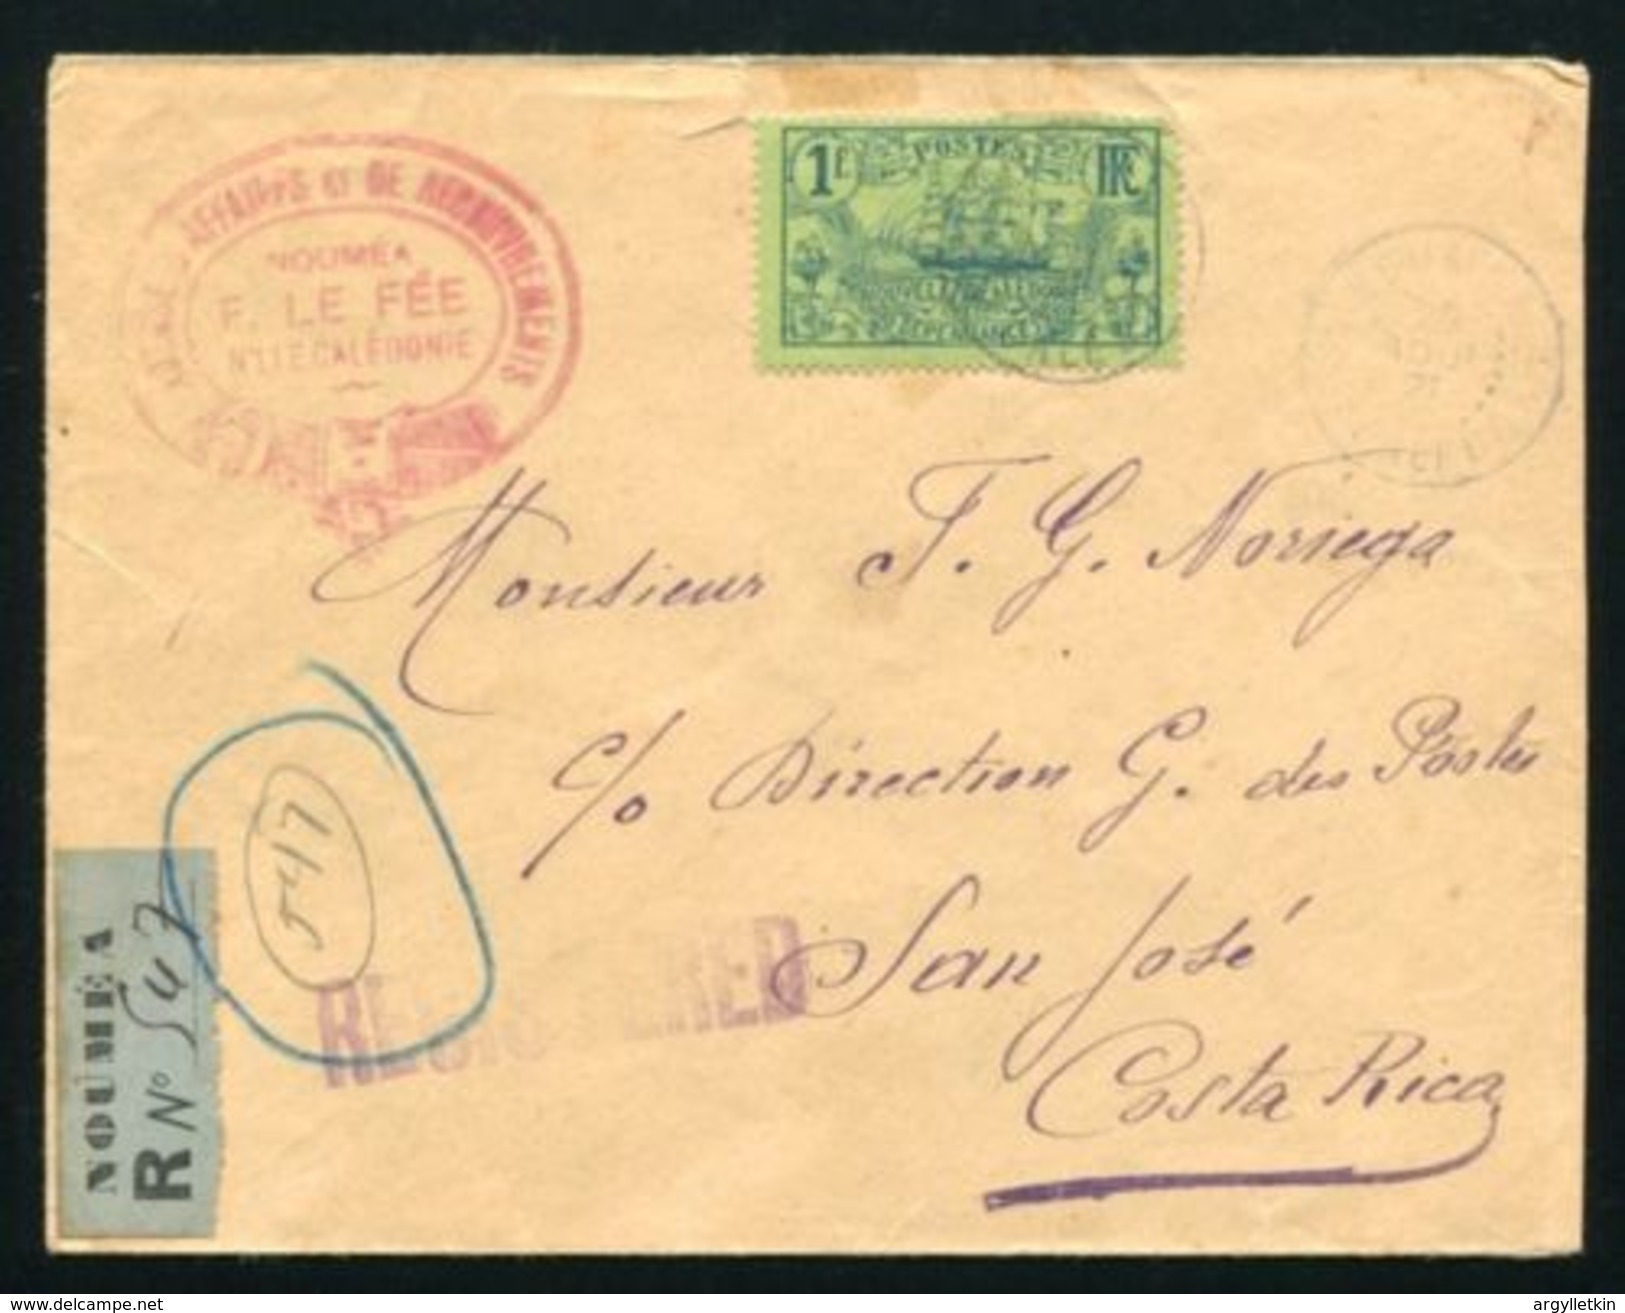 NEW CALEDONIA AMAZING REGISTERED COVER TO COSTA RICA - Covers & Documents